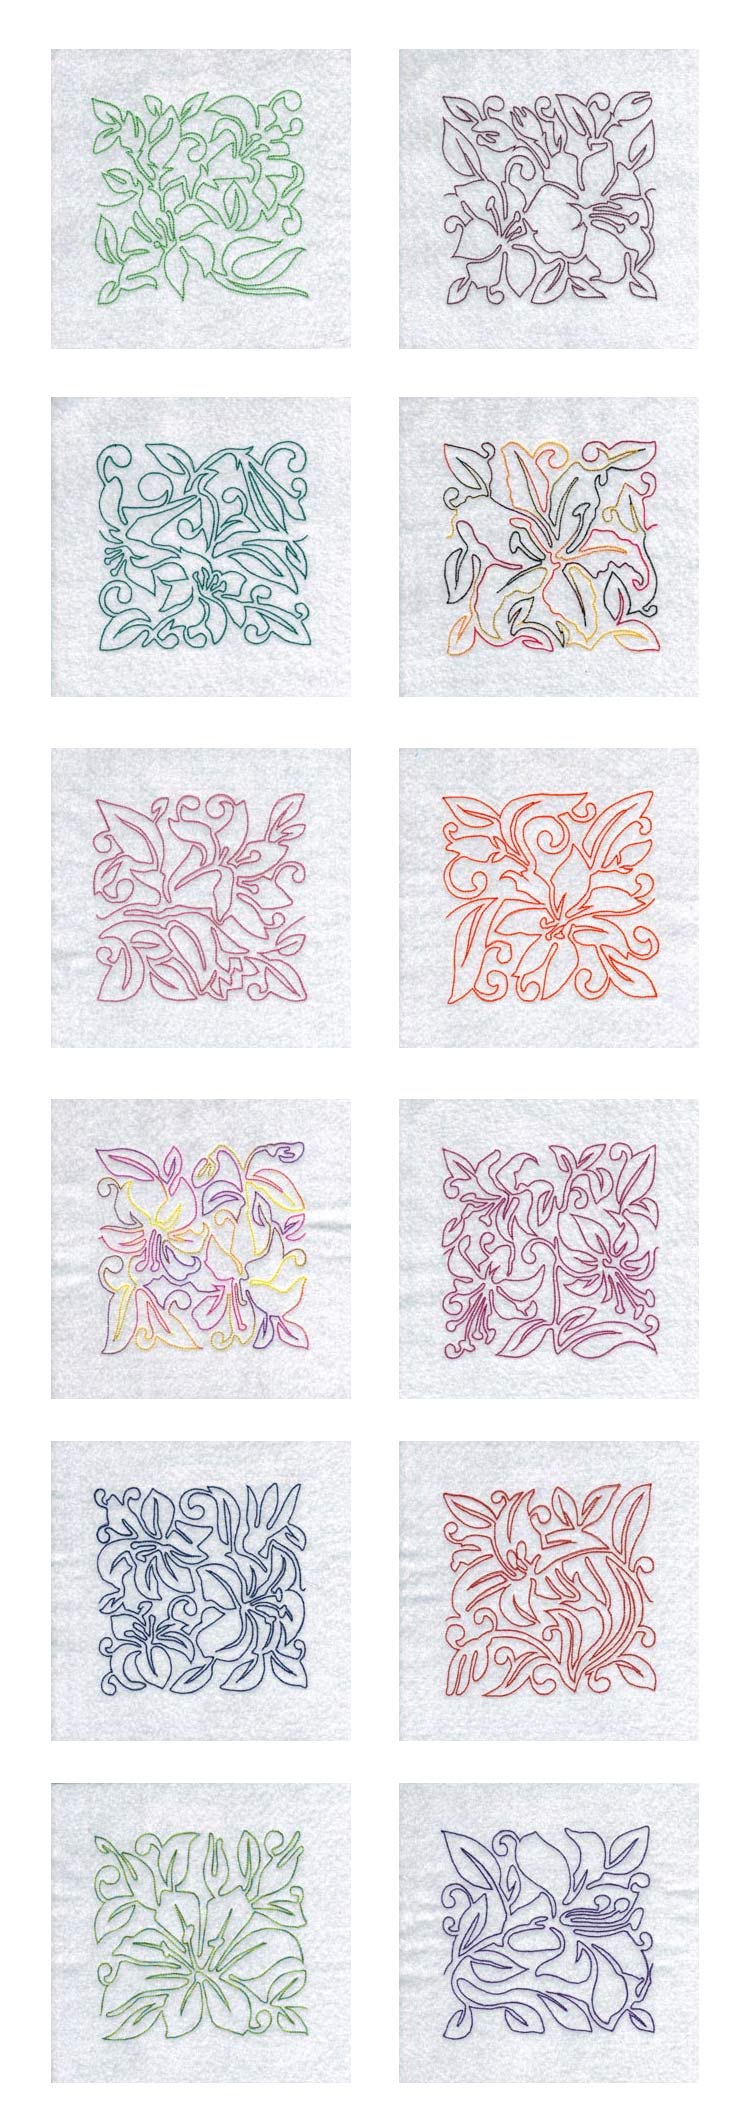 Lineart Lily Blocks Embroidery Machine Design Details